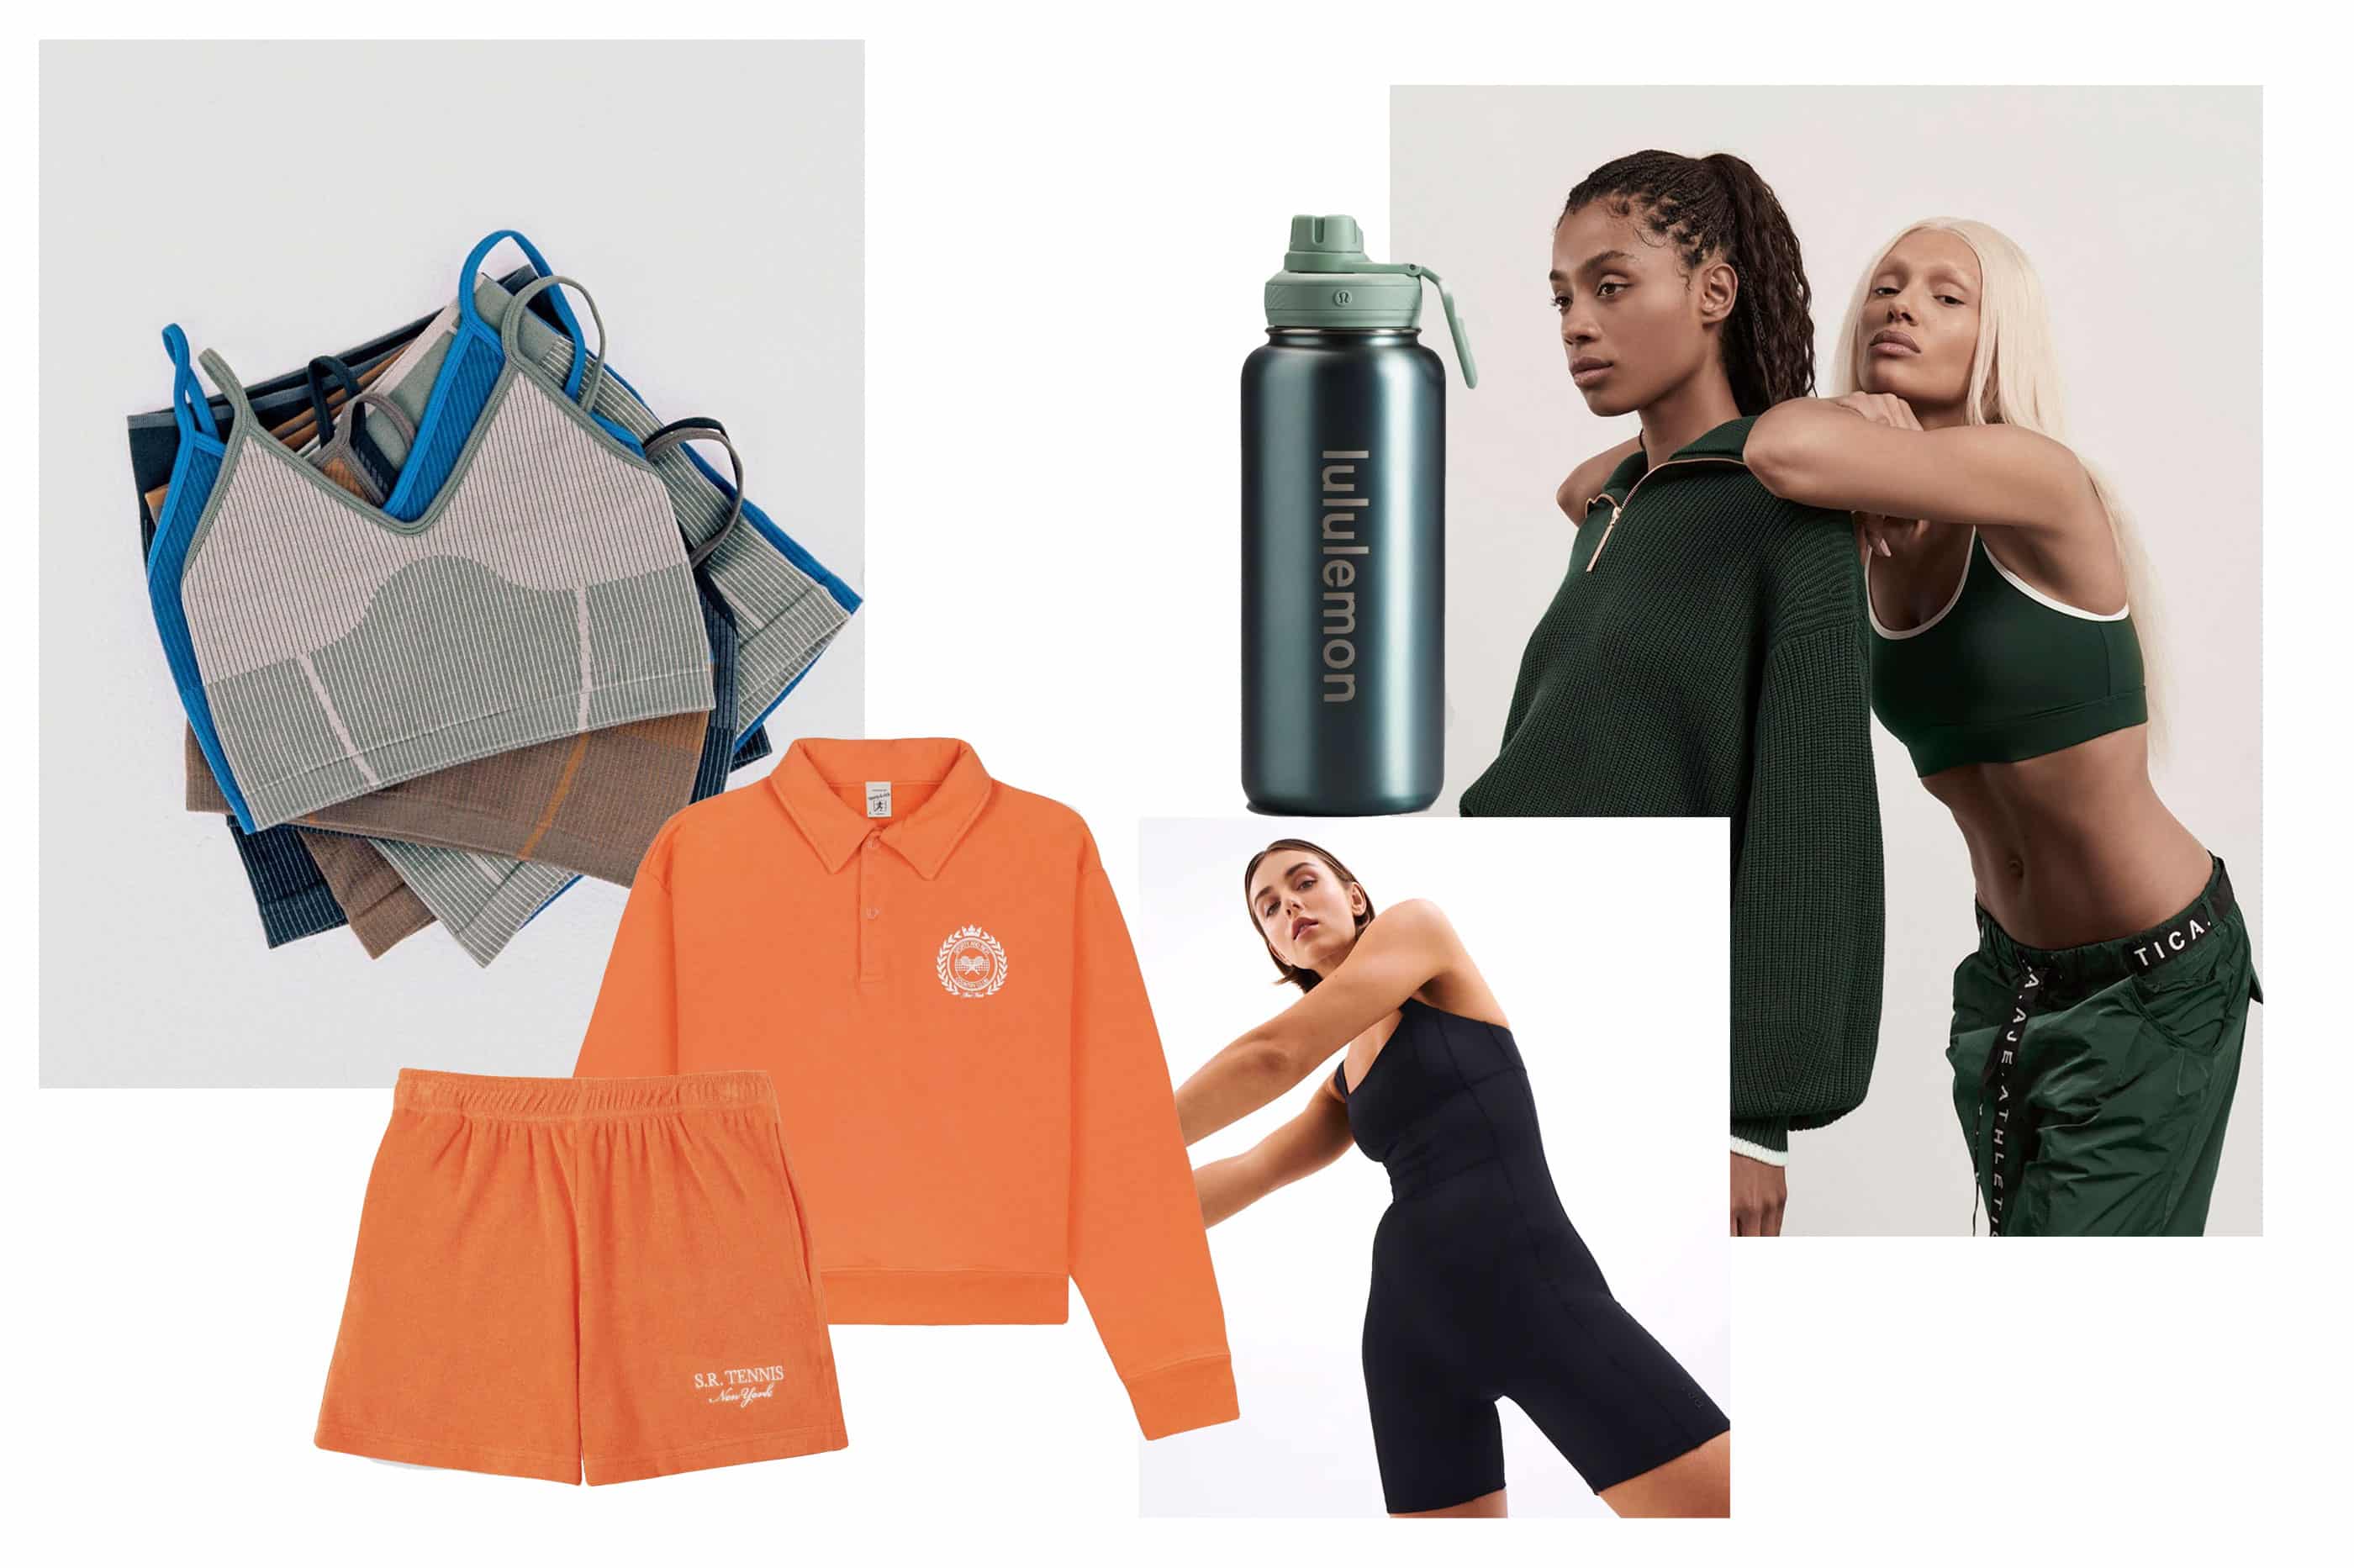 How the founders of Nimble Activewear turned a childhood